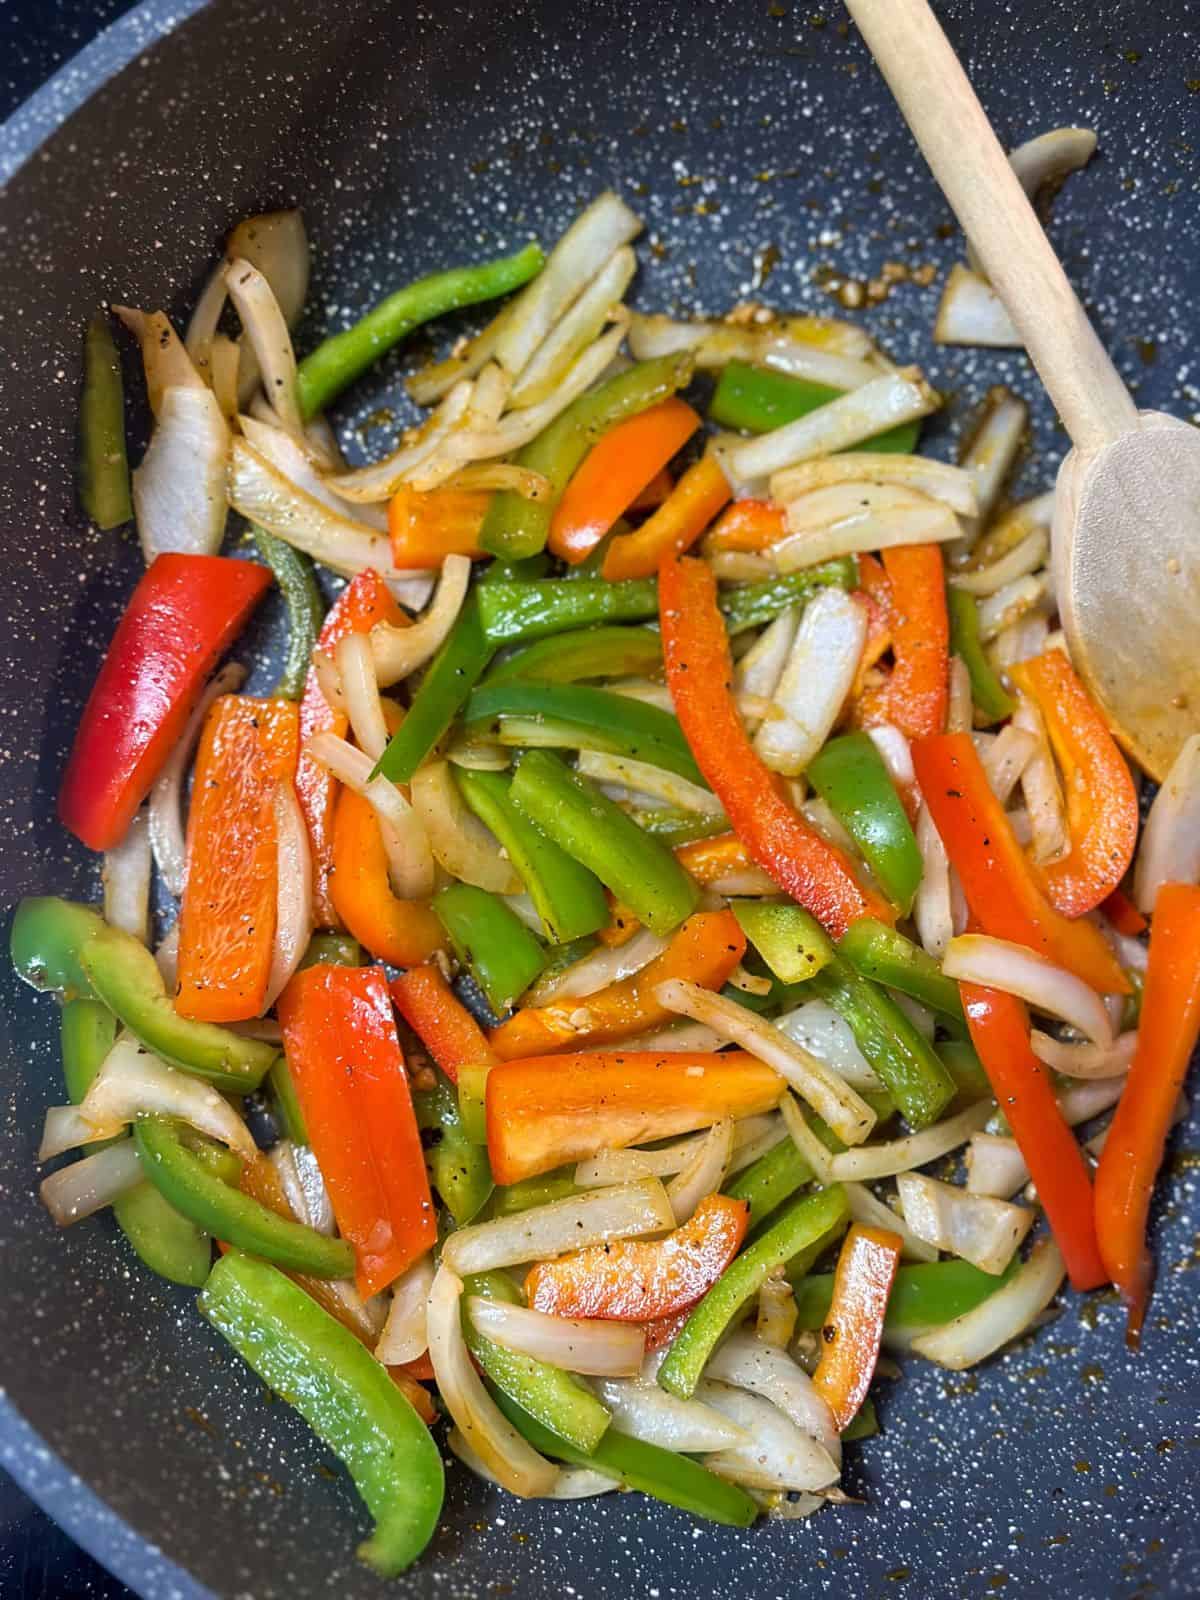 Sautéed onions and bell peppers in a skillet, seasoned for the base of a flavorful Cajun Smothered Chicken dish.